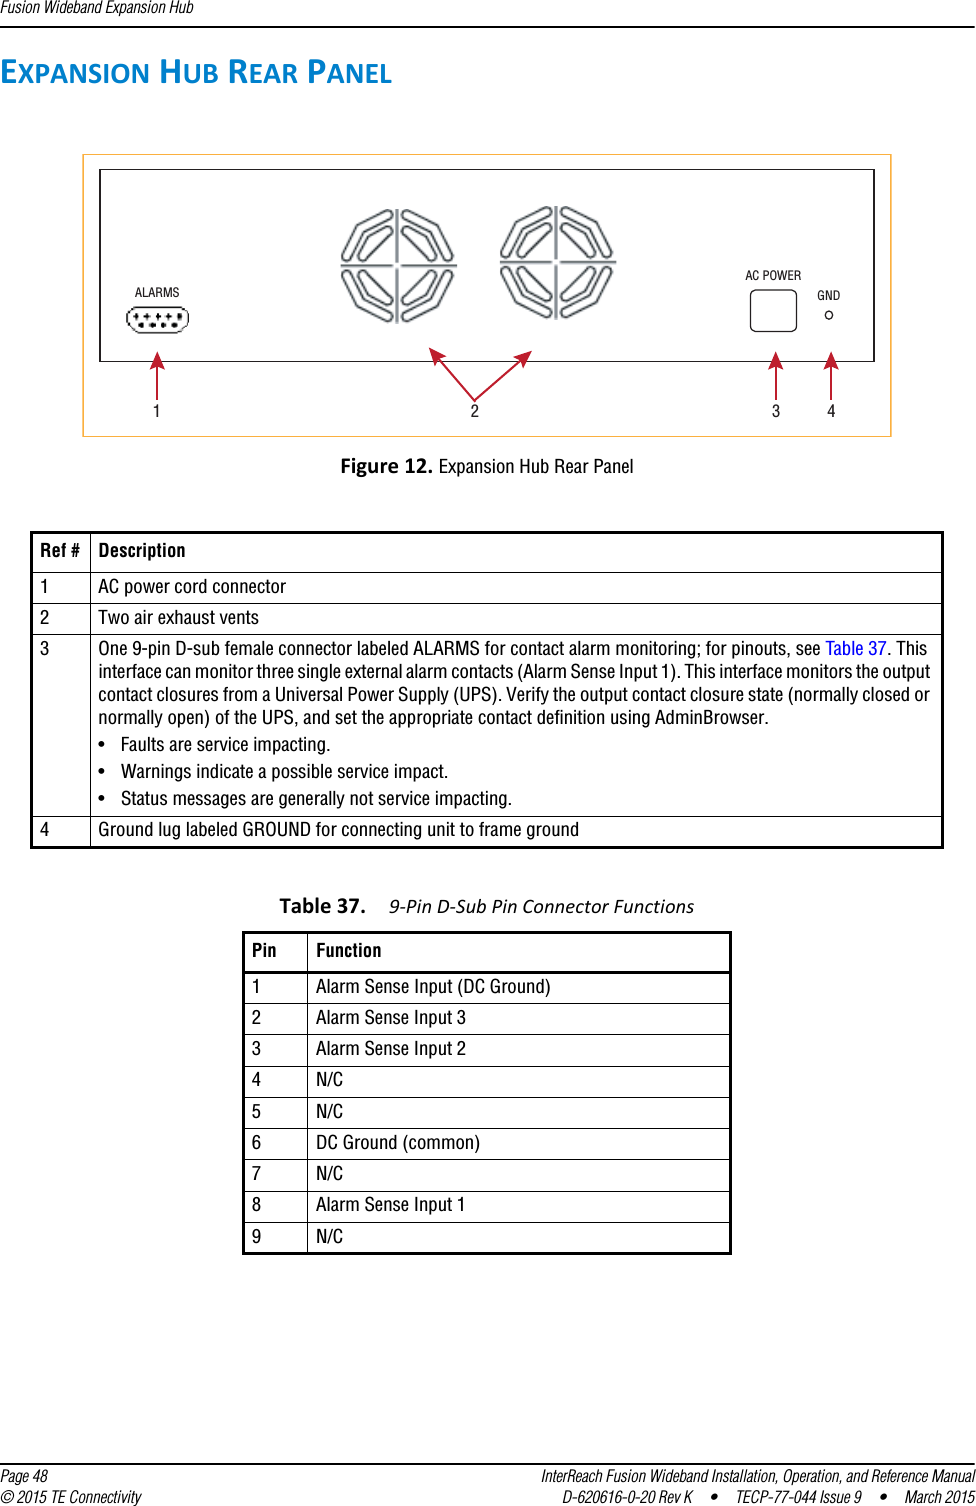 Fusion Wideband Expansion Hub  Page 48 InterReach Fusion Wideband Installation, Operation, and Reference Manual© 2015 TE Connectivity D-620616-0-20 Rev K  •  TECP-77-044 Issue 9  •  March 2015EXPANSION HUB REAR PANELFigure 12. Expansion Hub Rear PanelRef # Description1AC power cord connector2Two air exhaust vents3One 9-pin D-sub female connector labeled ALARMS for contact alarm monitoring; for pinouts, see Table 37. This interface can monitor three single external alarm contacts (Alarm Sense Input 1). This interface monitors the output contact closures from a Universal Power Supply (UPS). Verify the output contact closure state (normally closed or normally open) of the UPS, and set the appropriate contact definition using AdminBrowser.• Faults are service impacting.•Warnings indicate a possible service impact.• Status messages are generally not service impacting.4Ground lug labeled GROUND for connecting unit to frame groundTable 37. 9-Pin D-Sub Pin Connector FunctionsPin Function1Alarm Sense Input (DC Ground)2Alarm Sense Input 33Alarm Sense Input 24N/C5N/C6DC Ground (common)7N/C8Alarm Sense Input 19N/CAC POWERALARMS GND1234